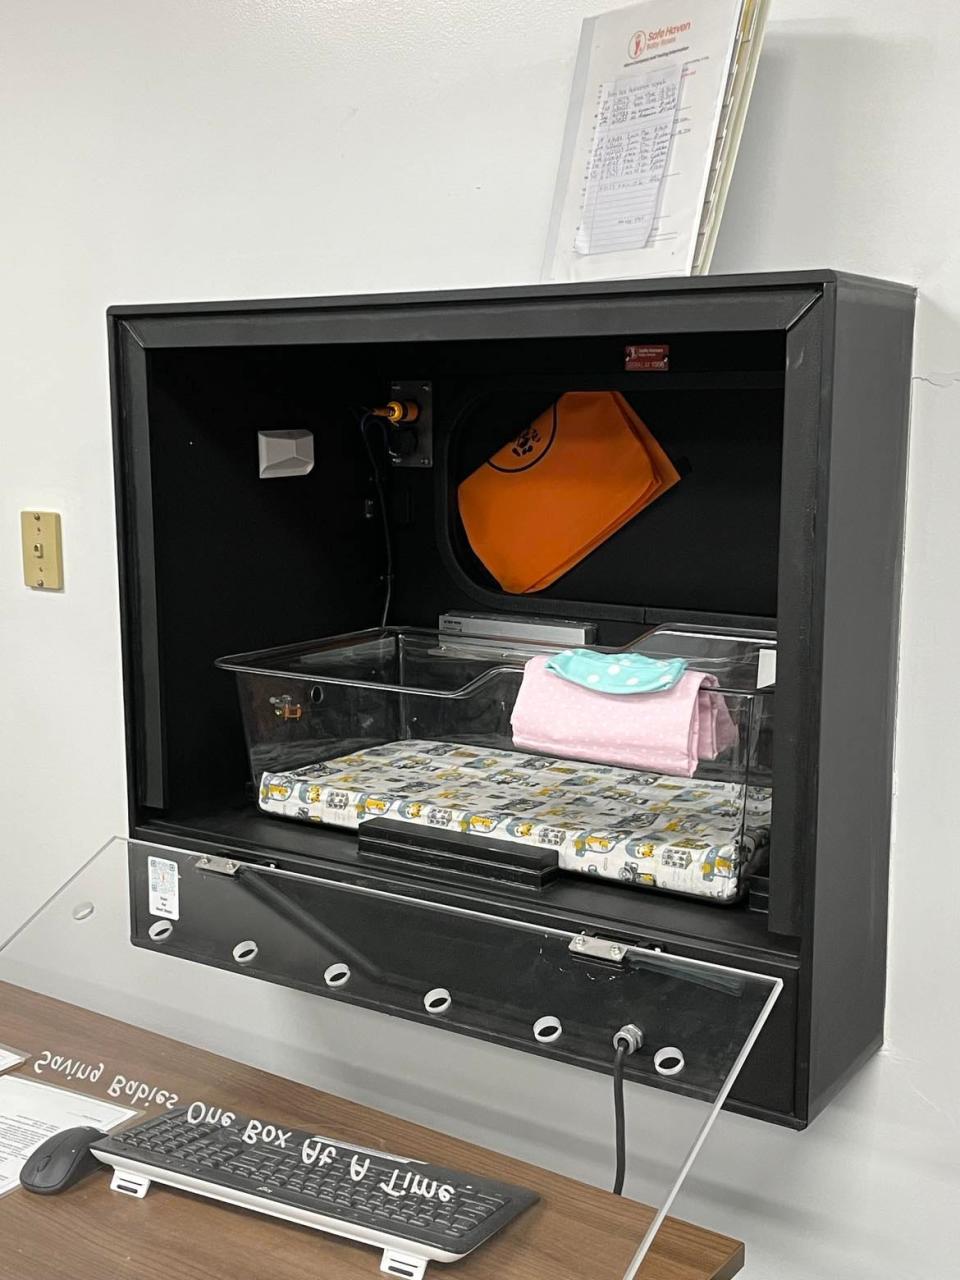 The Siloam Springs Fire Department has the 18th baby box in Arkansas that is now available to mothers who are in distress who can surrender an infant. The inside of the box is pictured here